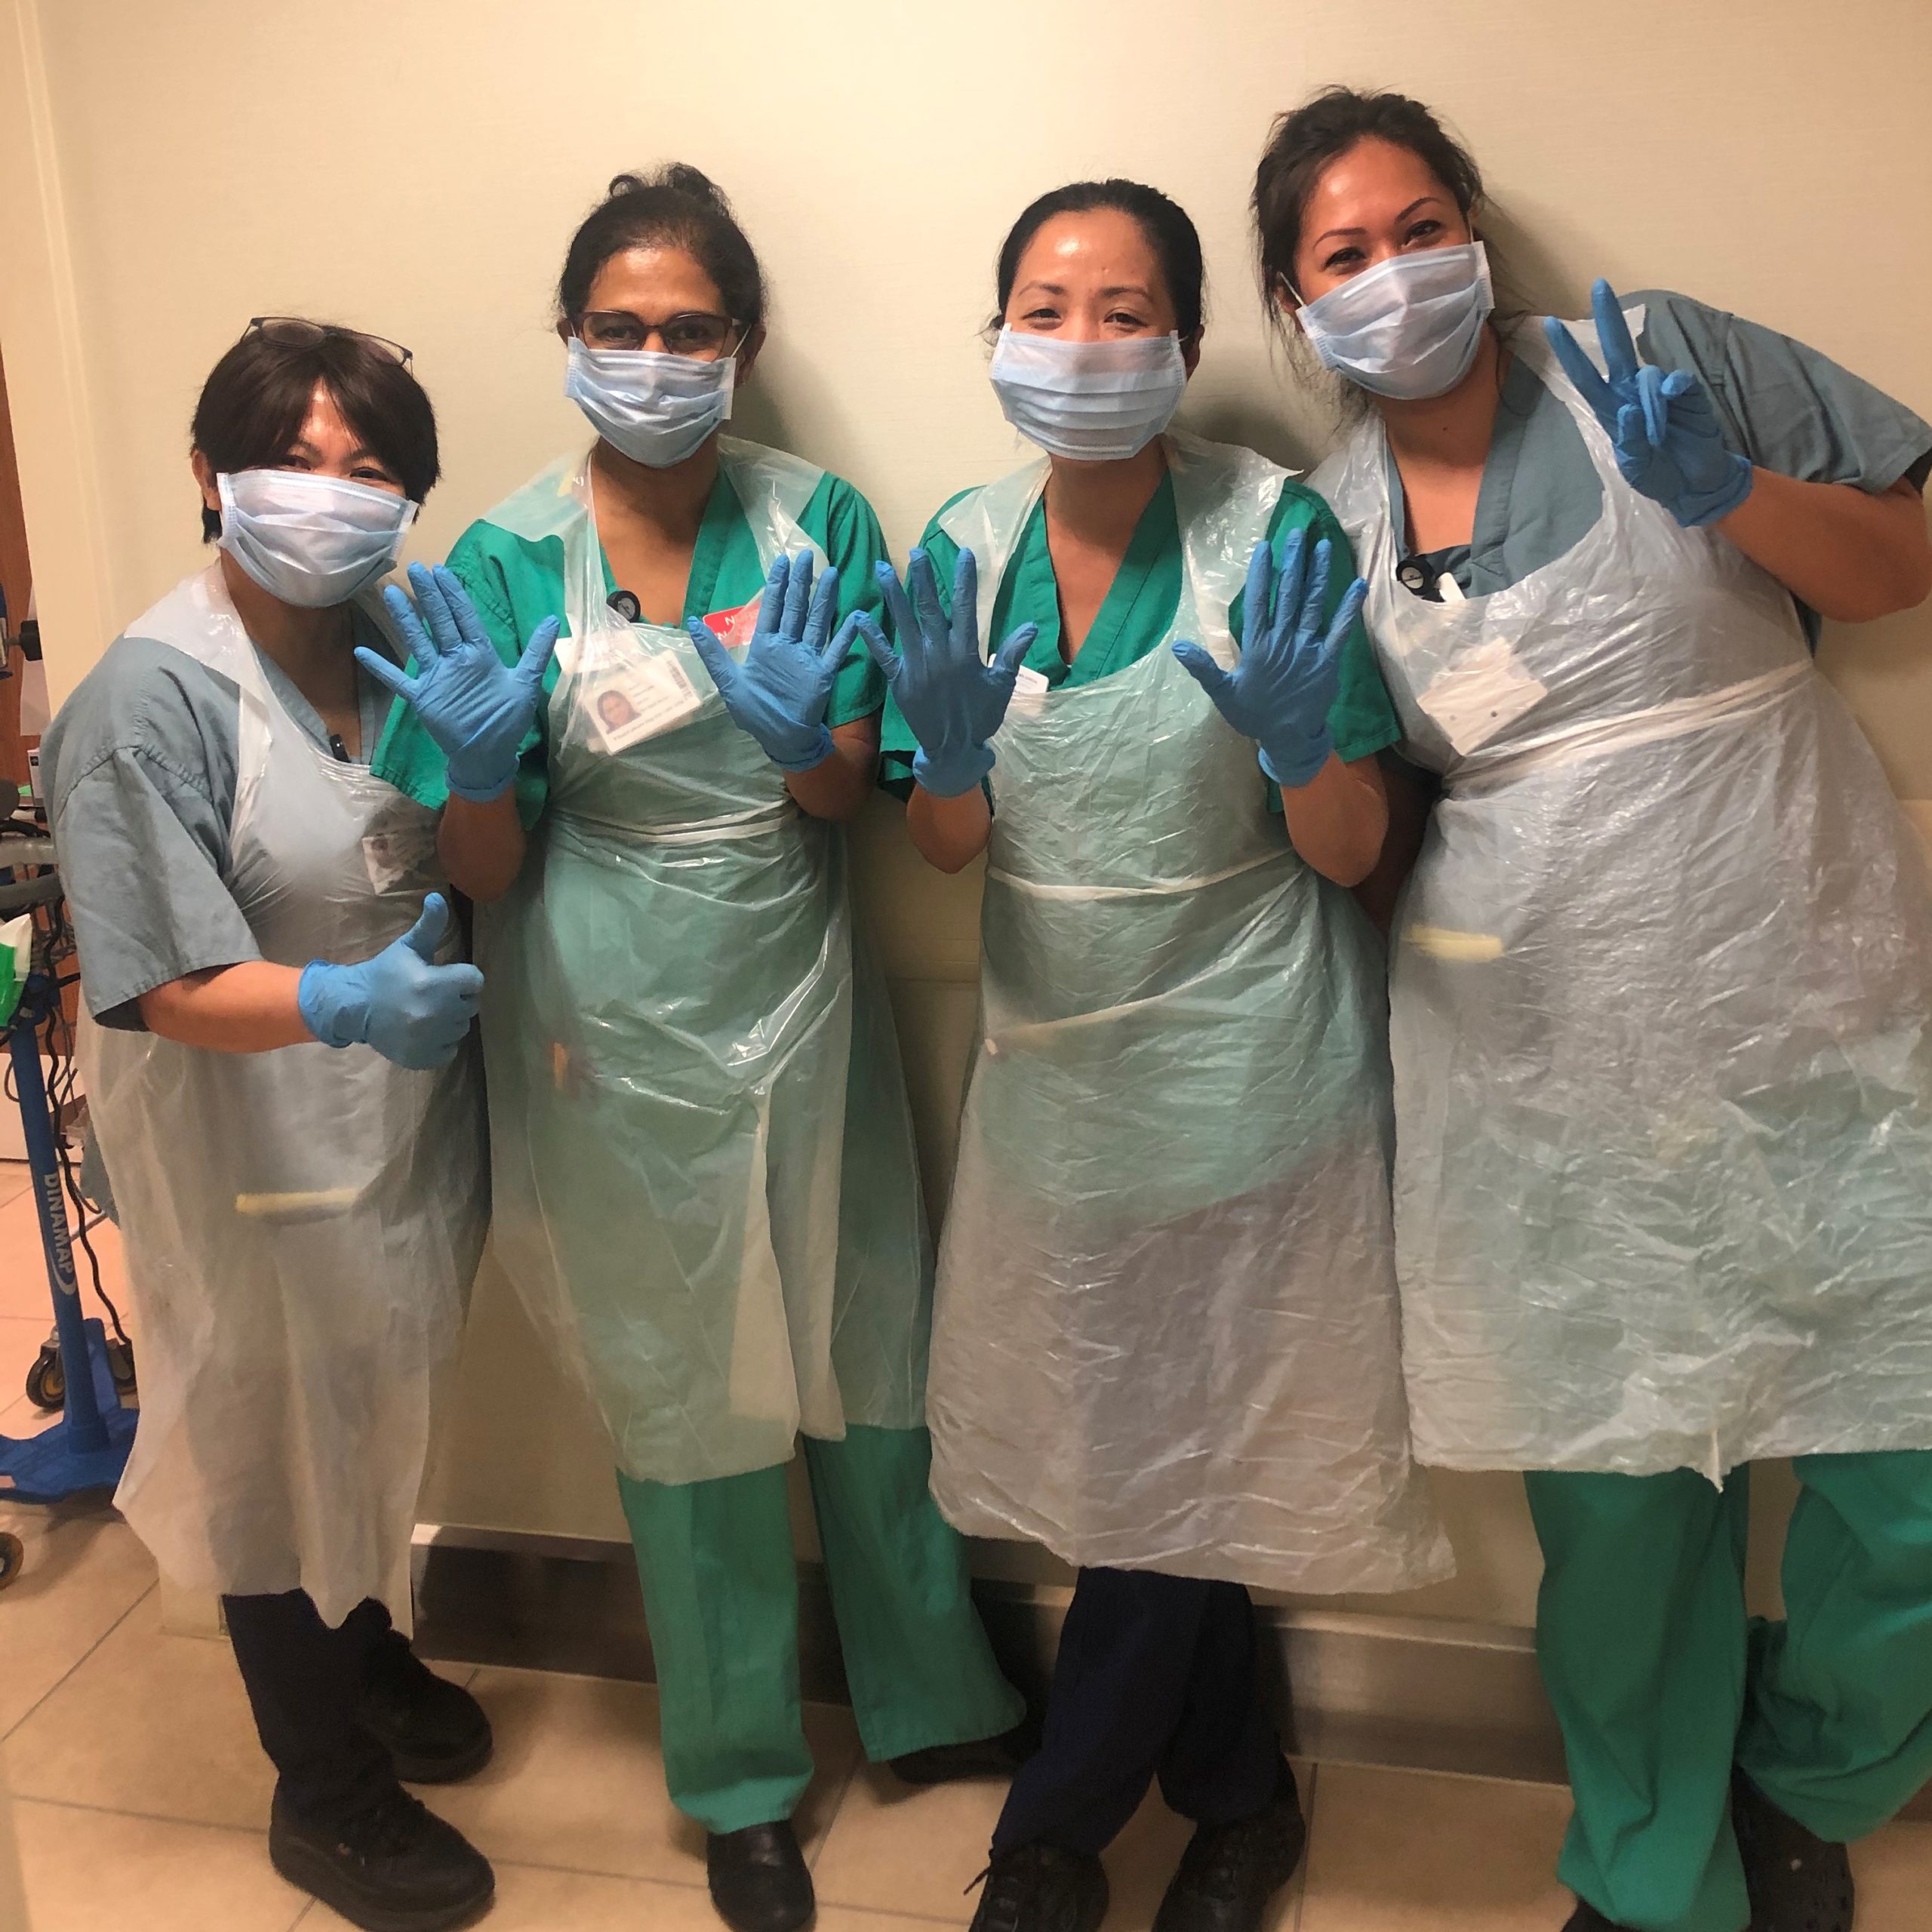 A group of hospital caregivers wearing personal protective equipment